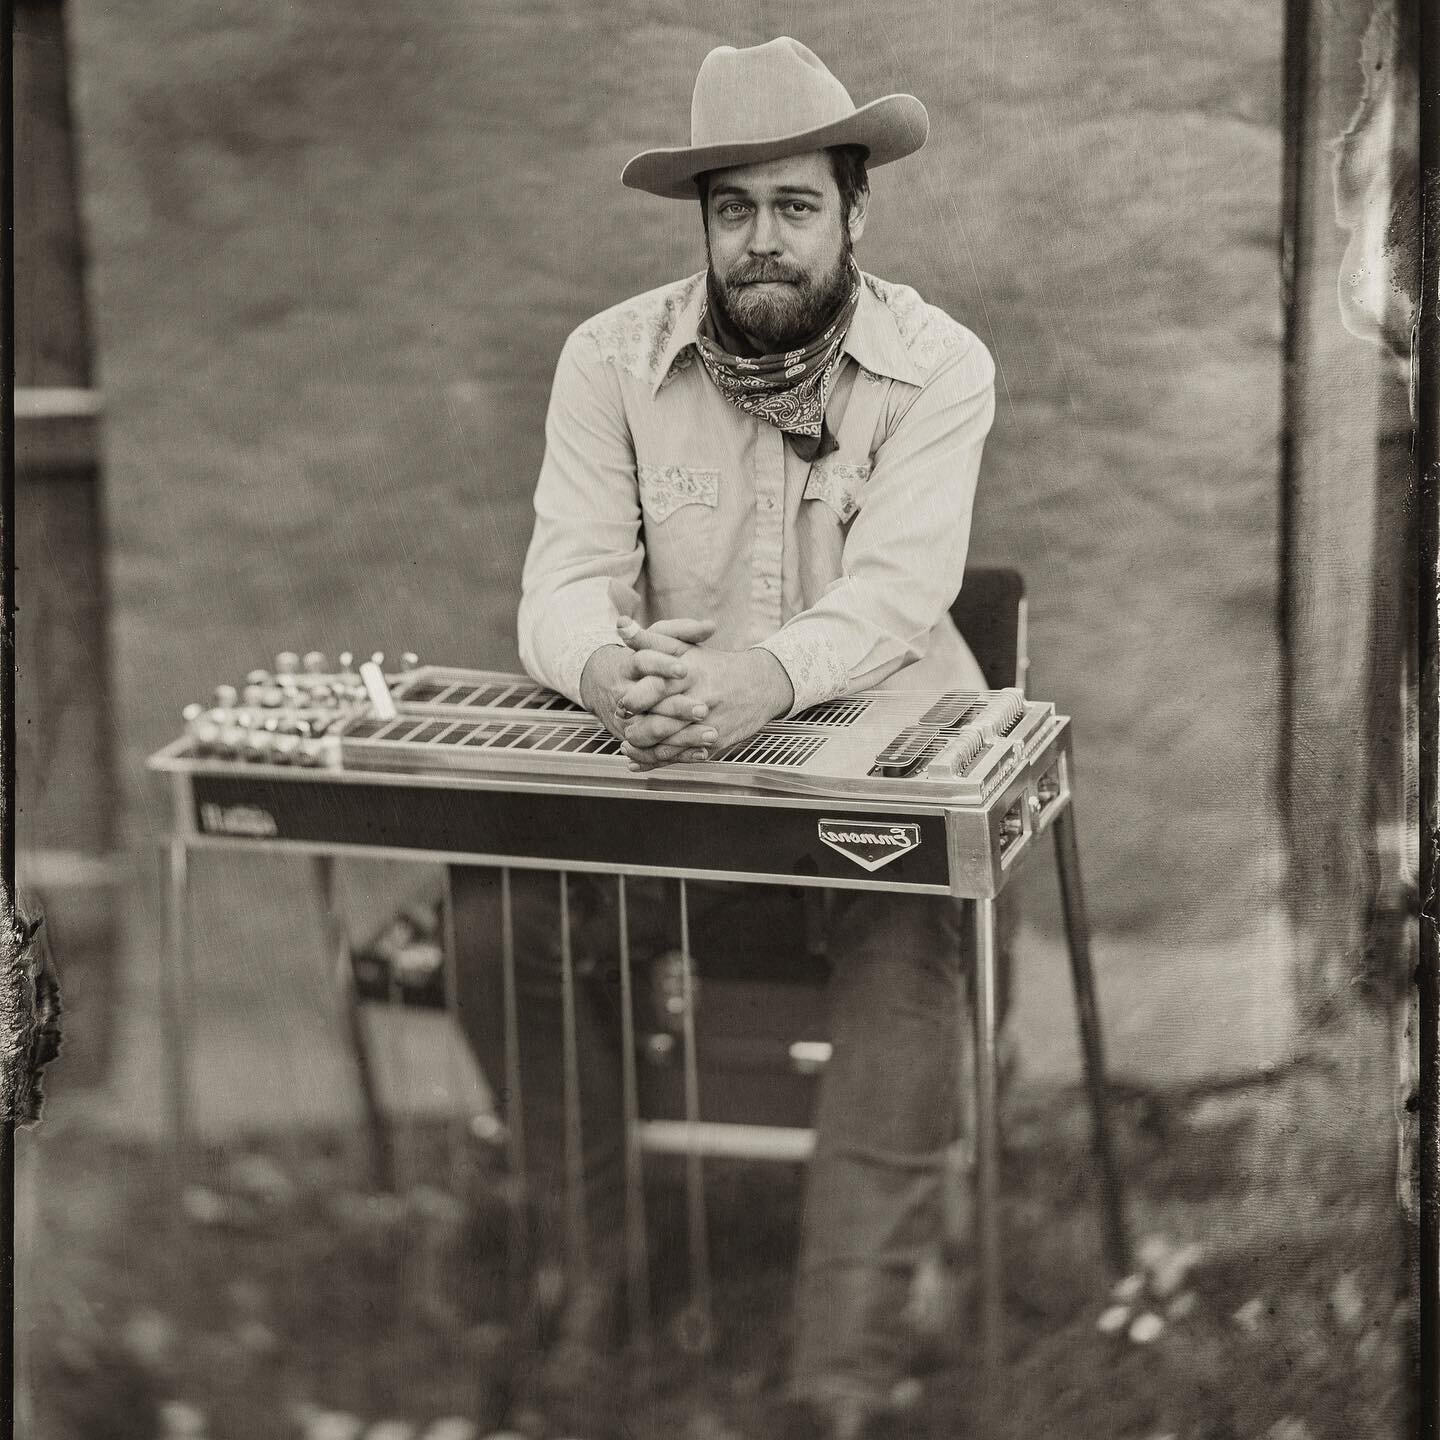 { 𝟻𝚇𝟽 𝚃𝙸𝙽𝚃𝚈𝙿𝙴 𝙿𝙾𝚁𝚃𝚁𝙰𝙸𝚃 } Neil the Steel. / @steel_jones 
.
F5 @ 5 MISSISSIPPIS ⛅️ 
UVP X Collodion
.
Shoot in the backyard of @sierraelizabethferrell &lsquo;s house. With our good buddy @kmiduggan holding the reflector. 
&mdash;&mda